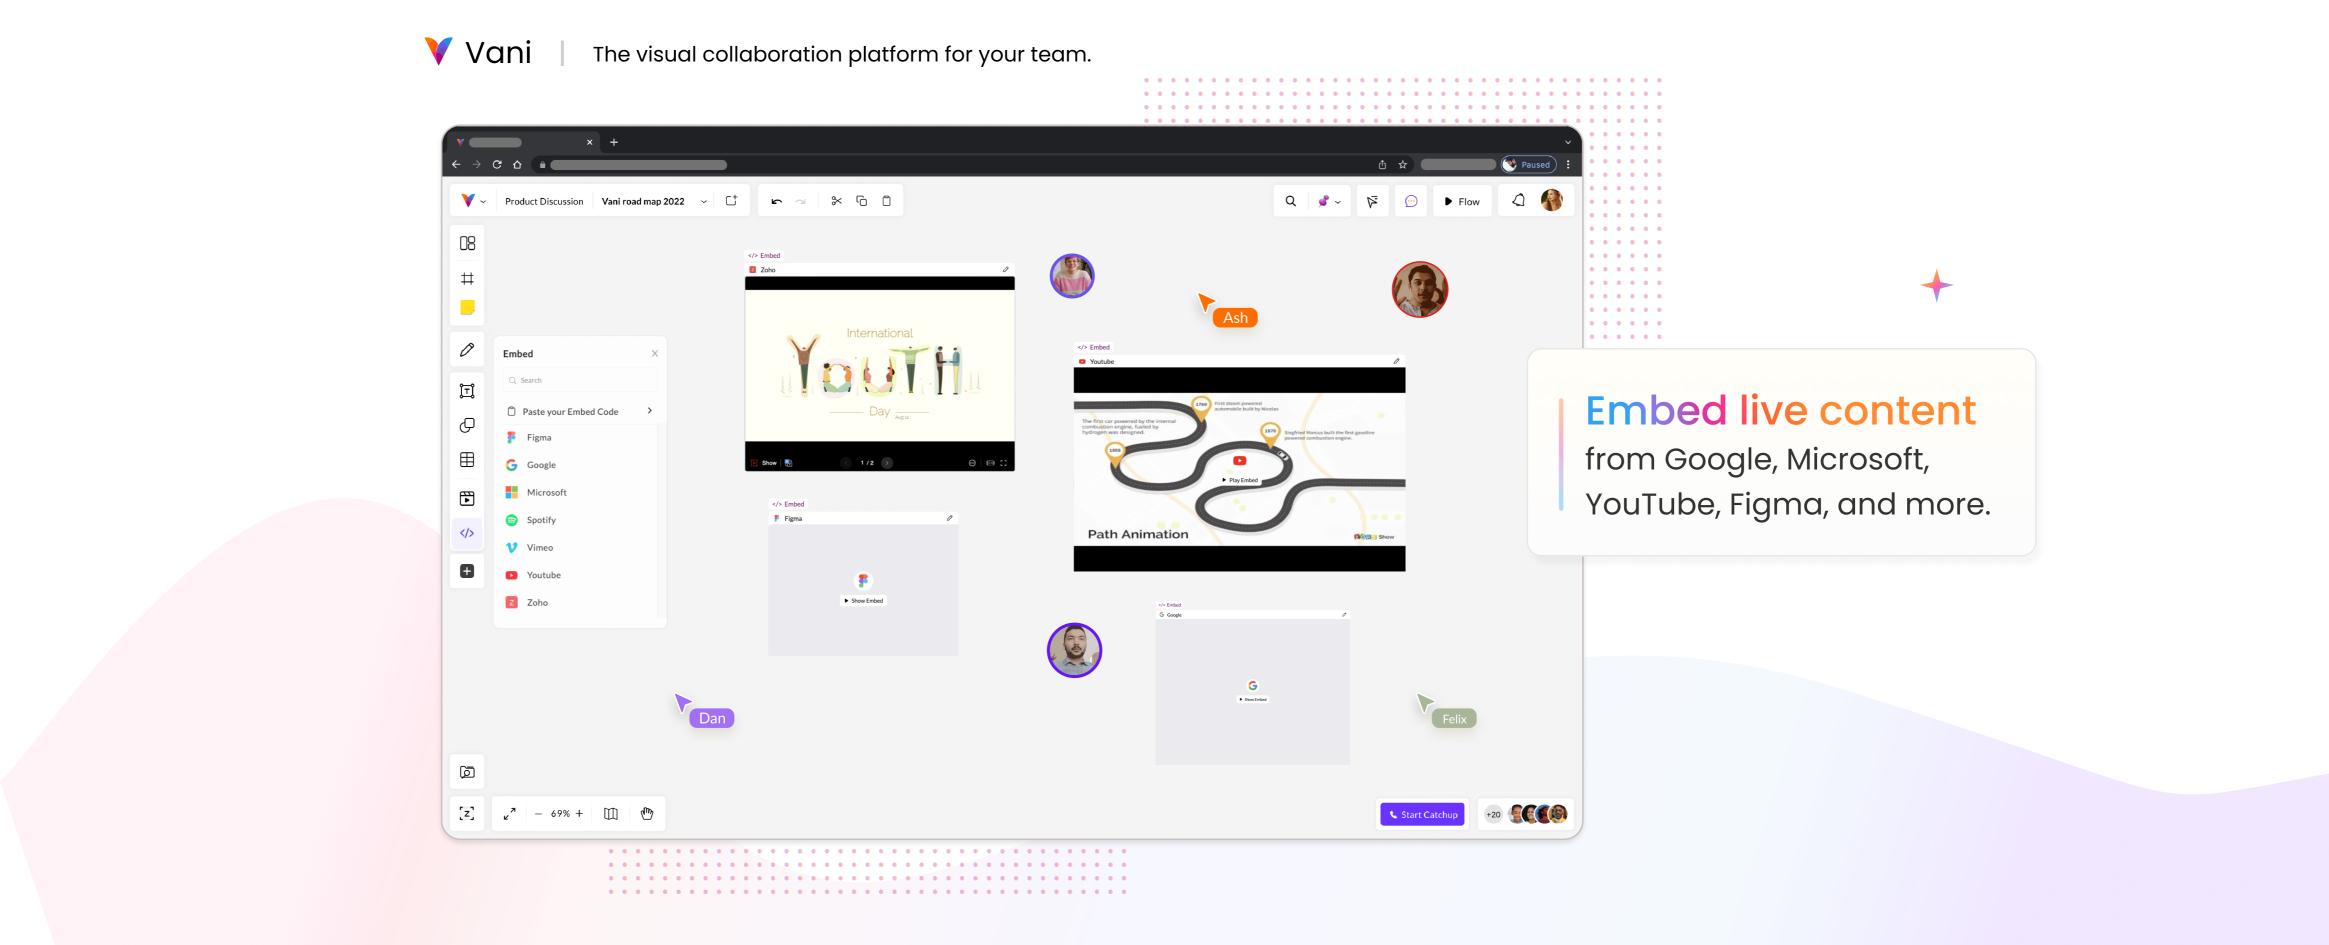 Vani - Embed live content from Google, Microsoft, YouTube, Figma, and more